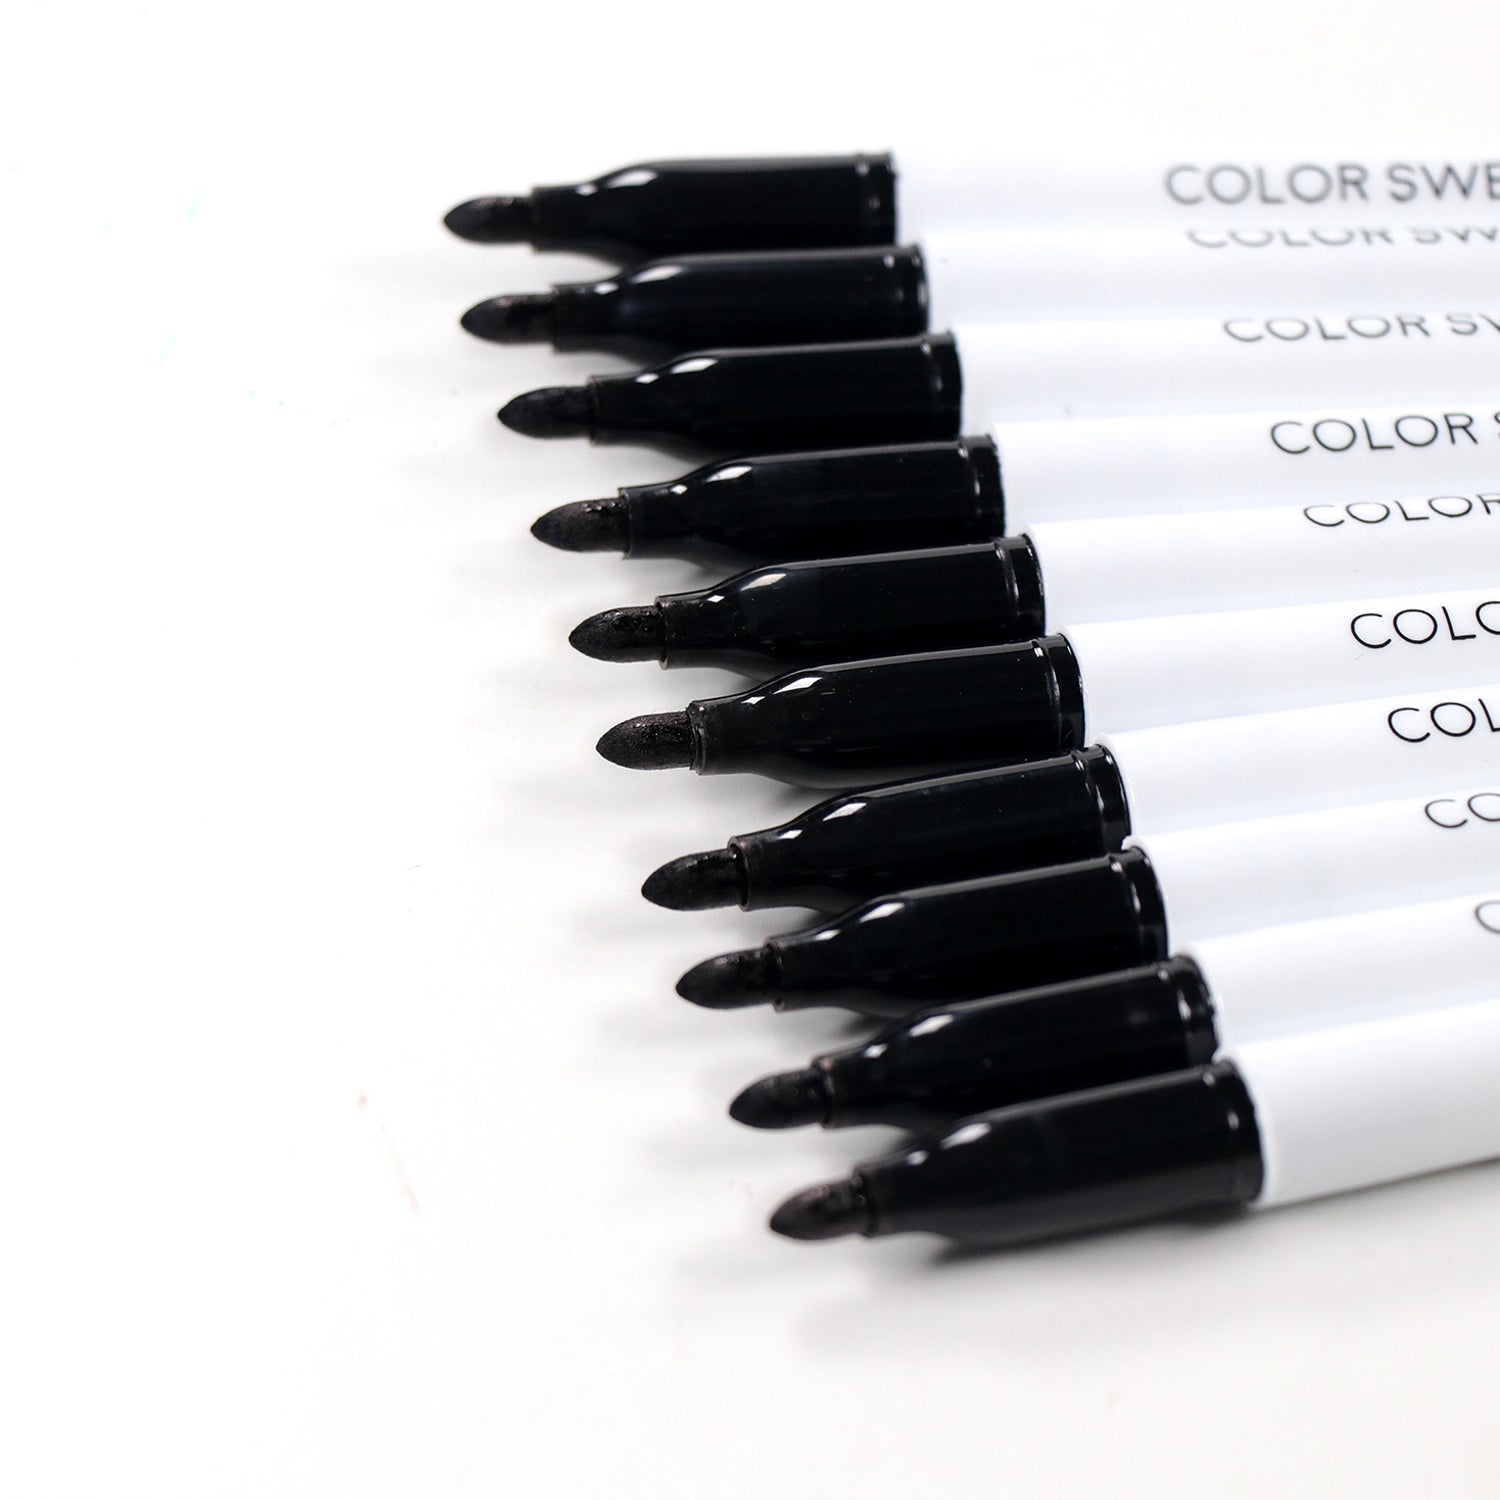 Color Swell Bulk Permanent Markers 60 Count (Black) for Teachers, Offices, Classrooms